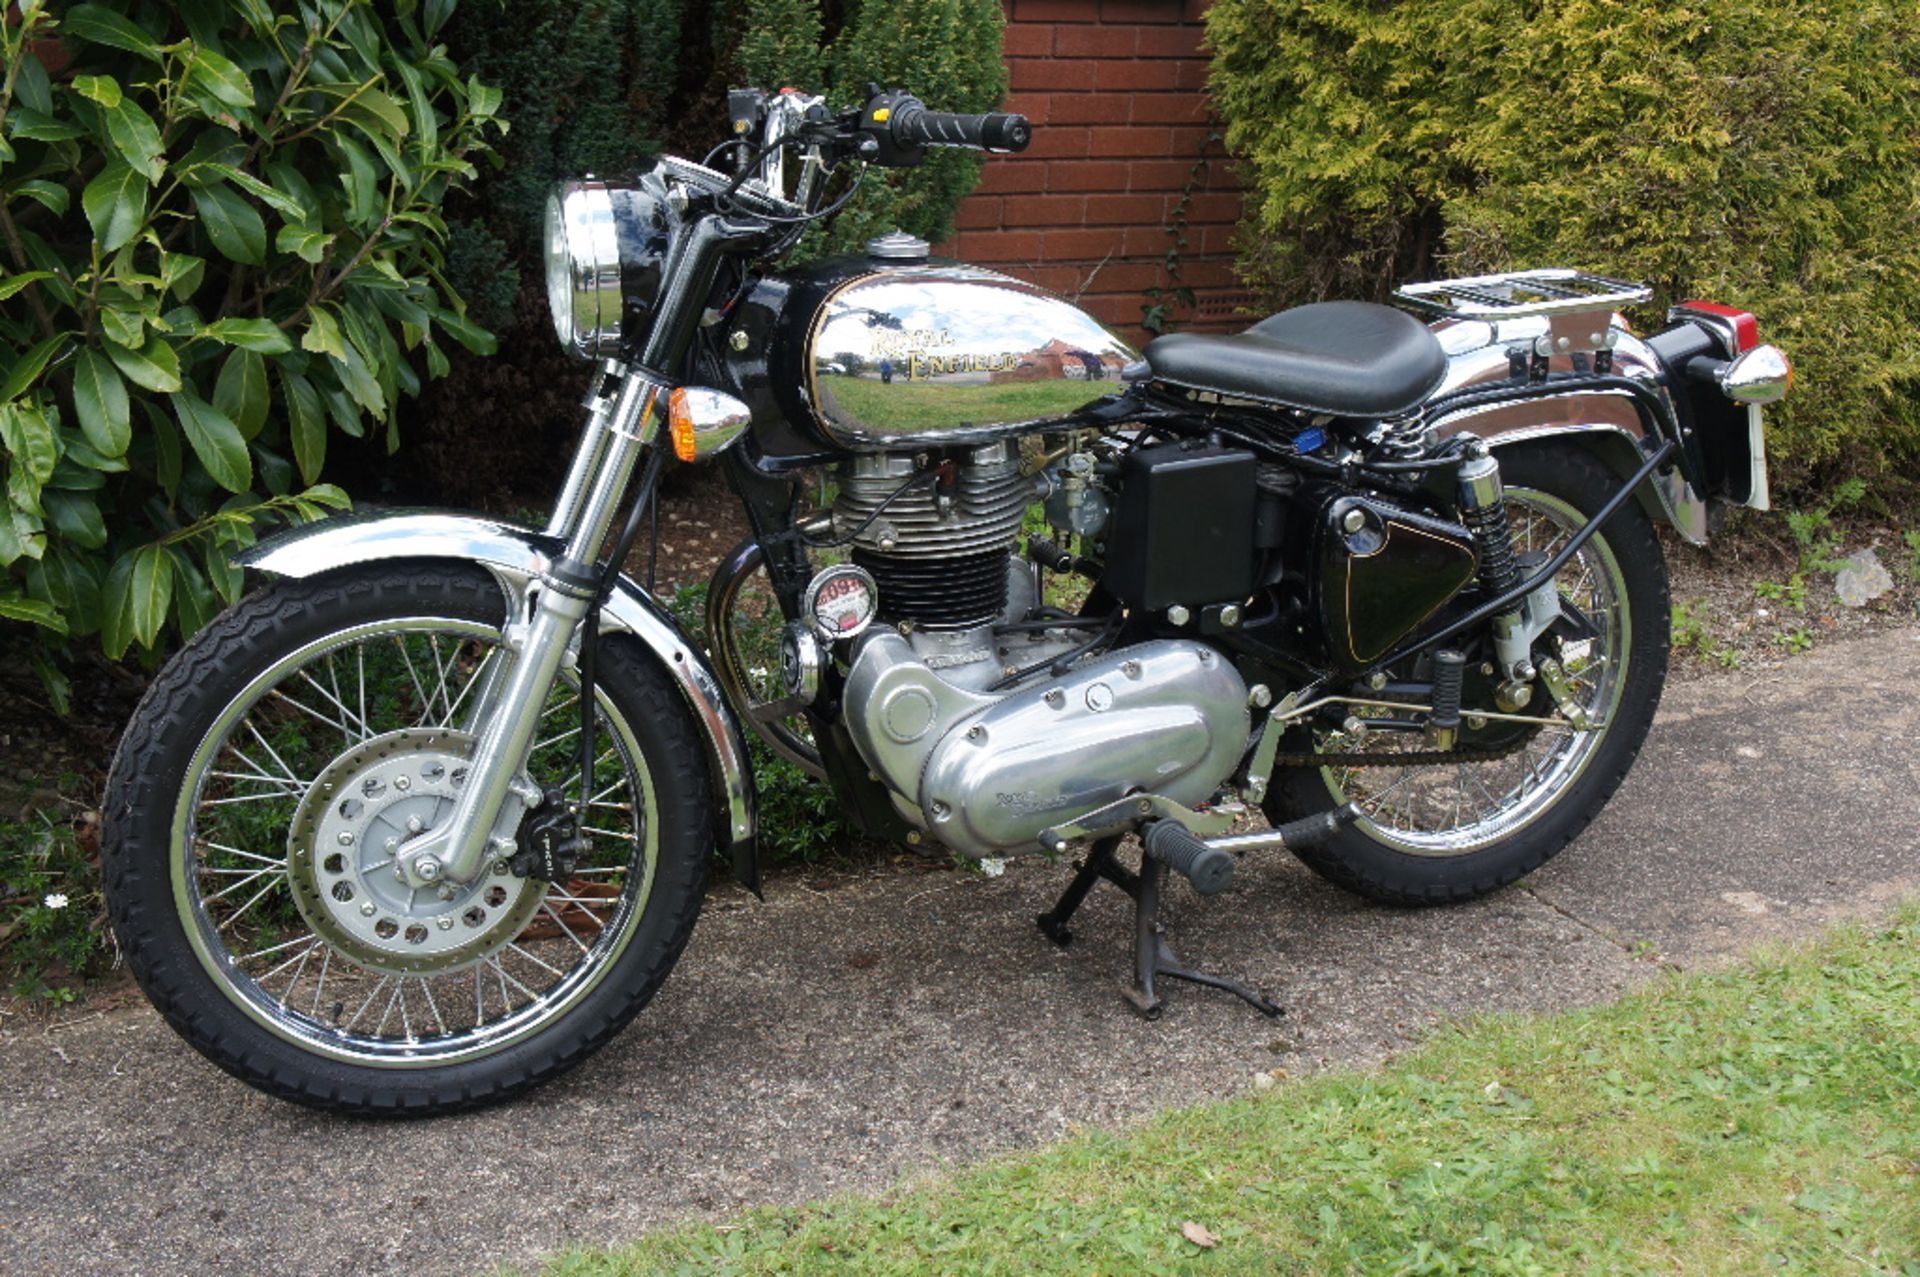 A 2009 Royal Enfield Bullet 350, registration number WA58 NMZ, chrome and black.